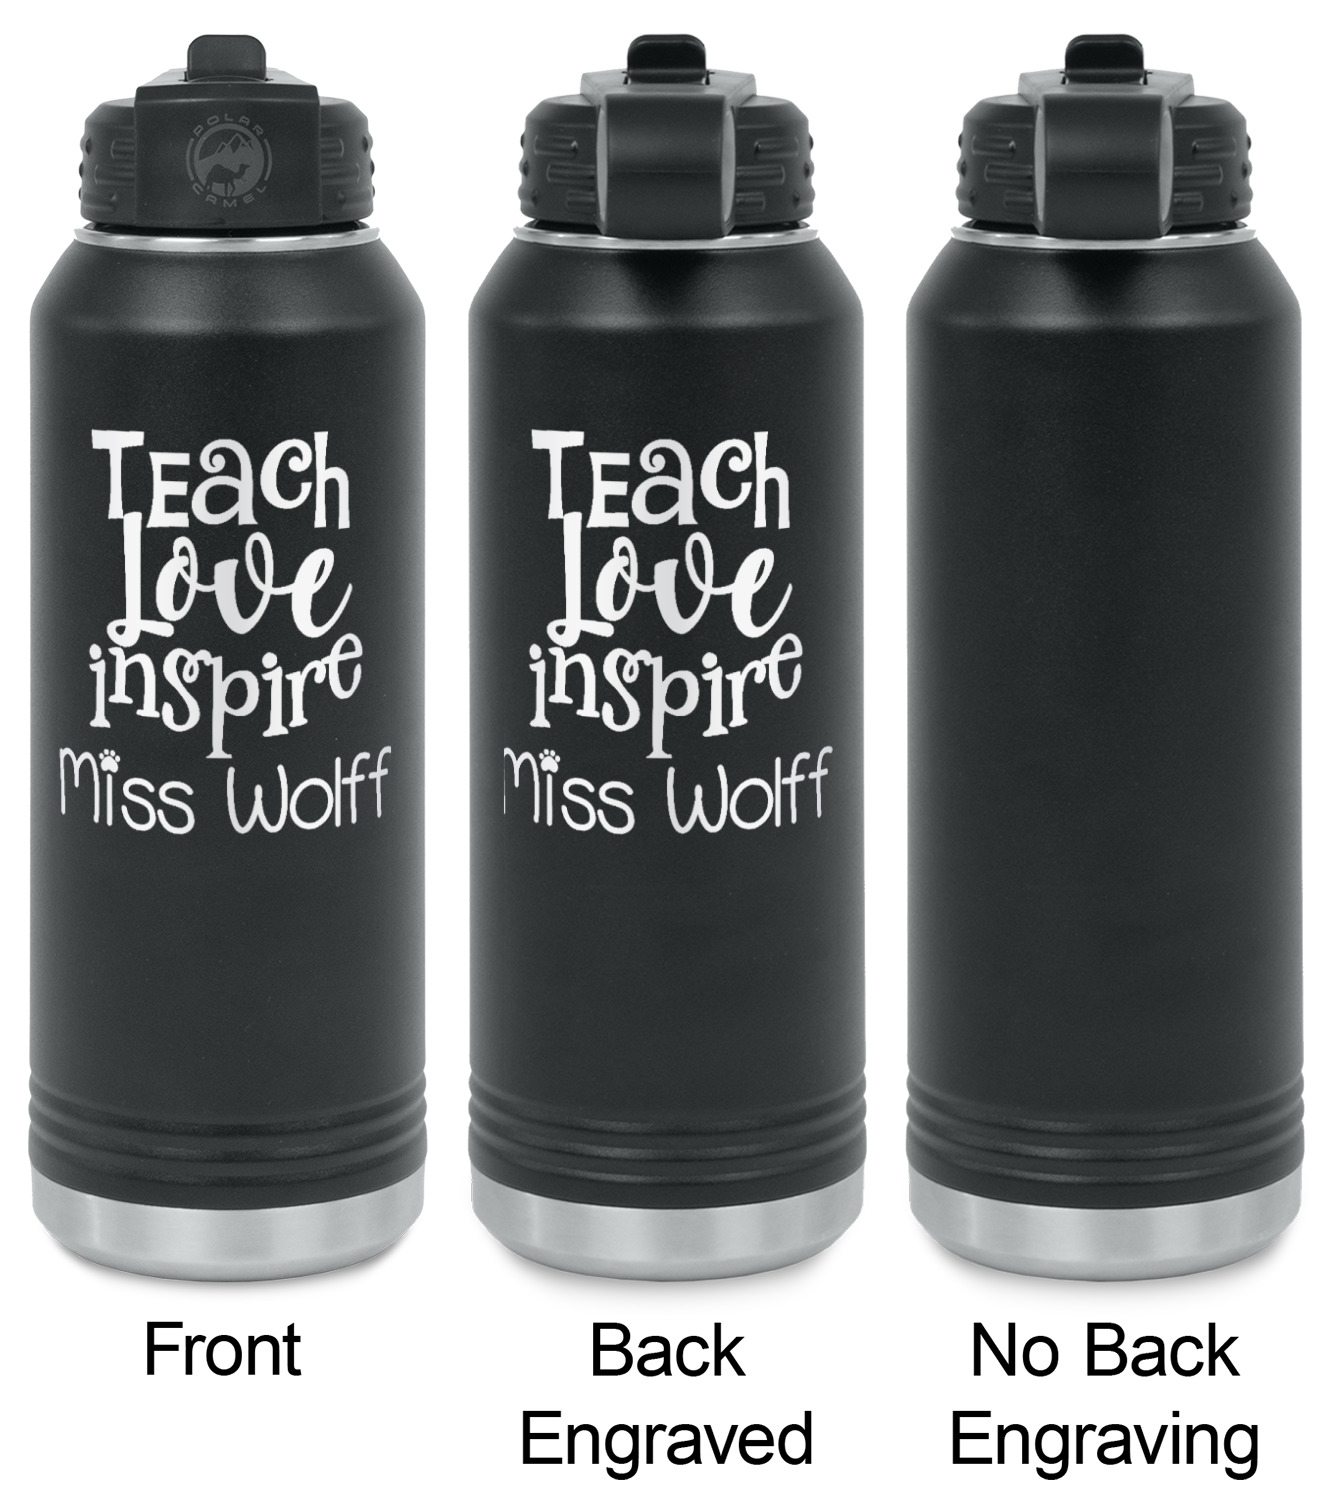 https://www.youcustomizeit.com/common/MAKE/1038343/Teacher-Quote-Laser-Engraved-Water-Bottles-2-Styles-Front-Back-View.jpg?lm=1666017709